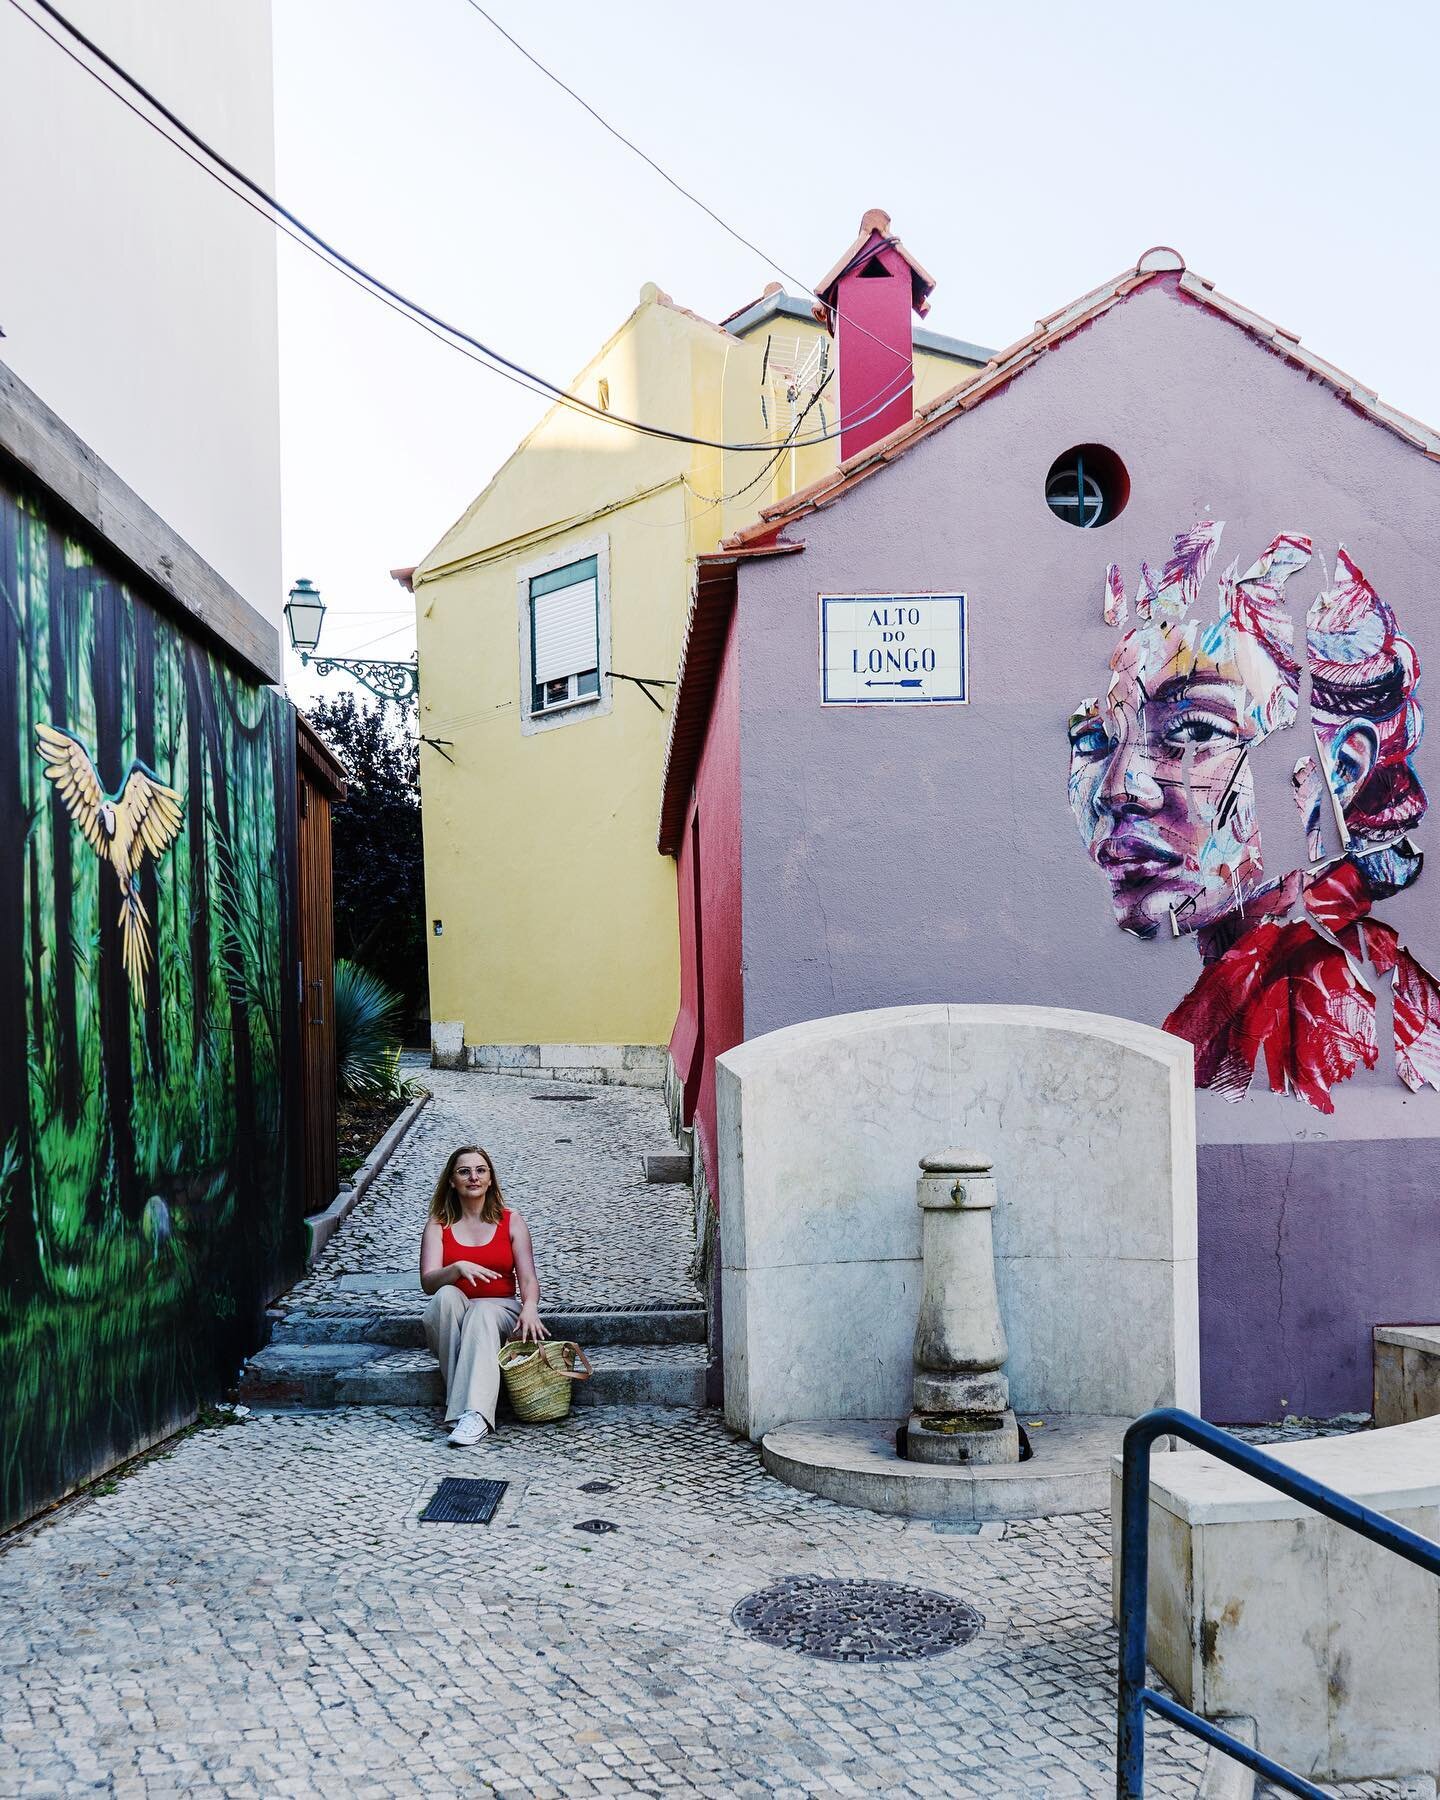 Away from museums and art galleries, seeking out its street art is another way of exploring and discovering a city. 

Like this charming alleyway in Bairro Alto neighbourhood of Lisbon with its candy colours houses adorned with beautiful artworks: po